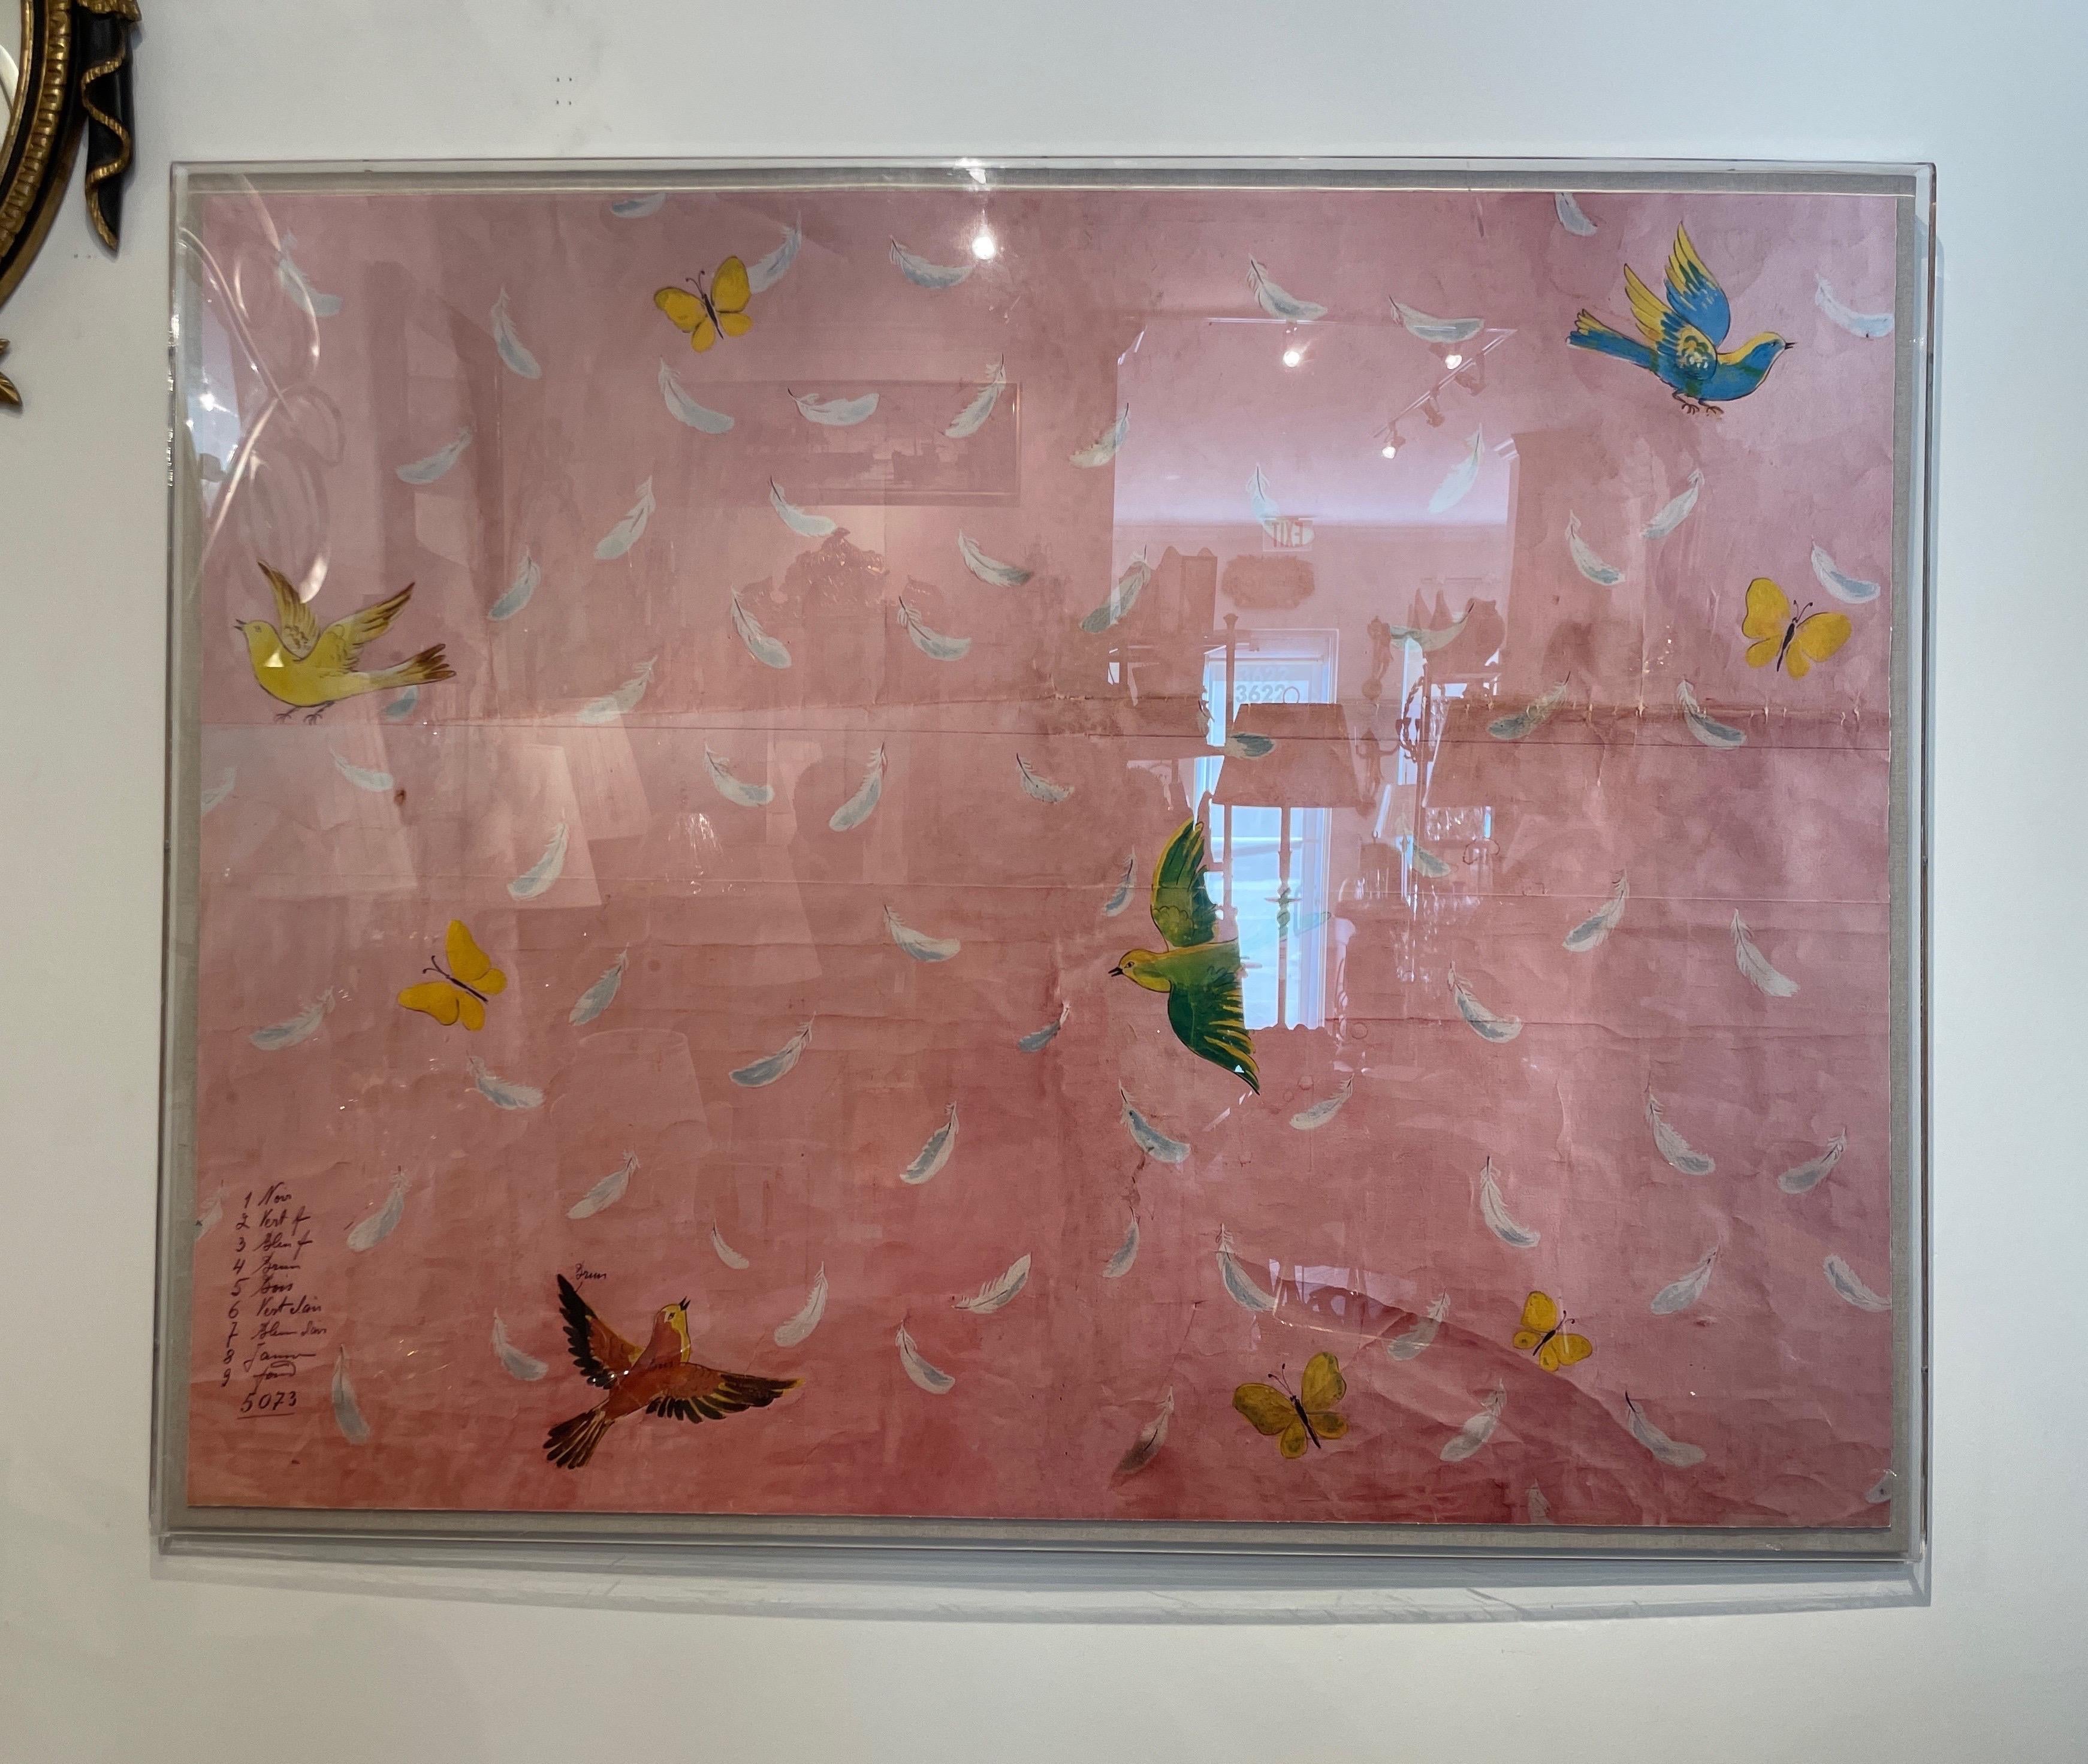 French Large Lucite Shadow Box with Print Featuring Birds, Butterflies & Feathers